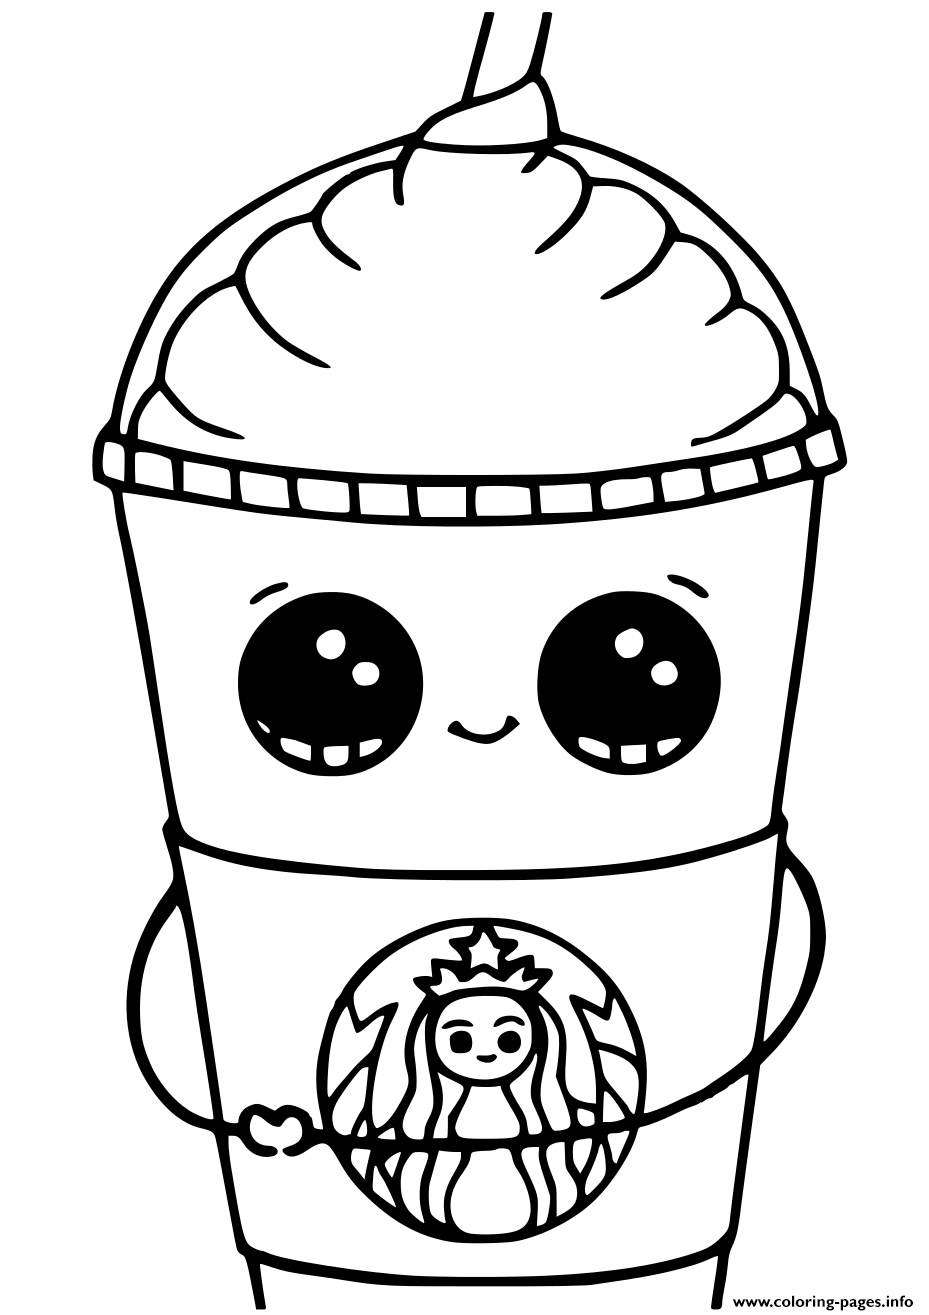 Unicorn Frappuccino Starbucks Coloring Pages